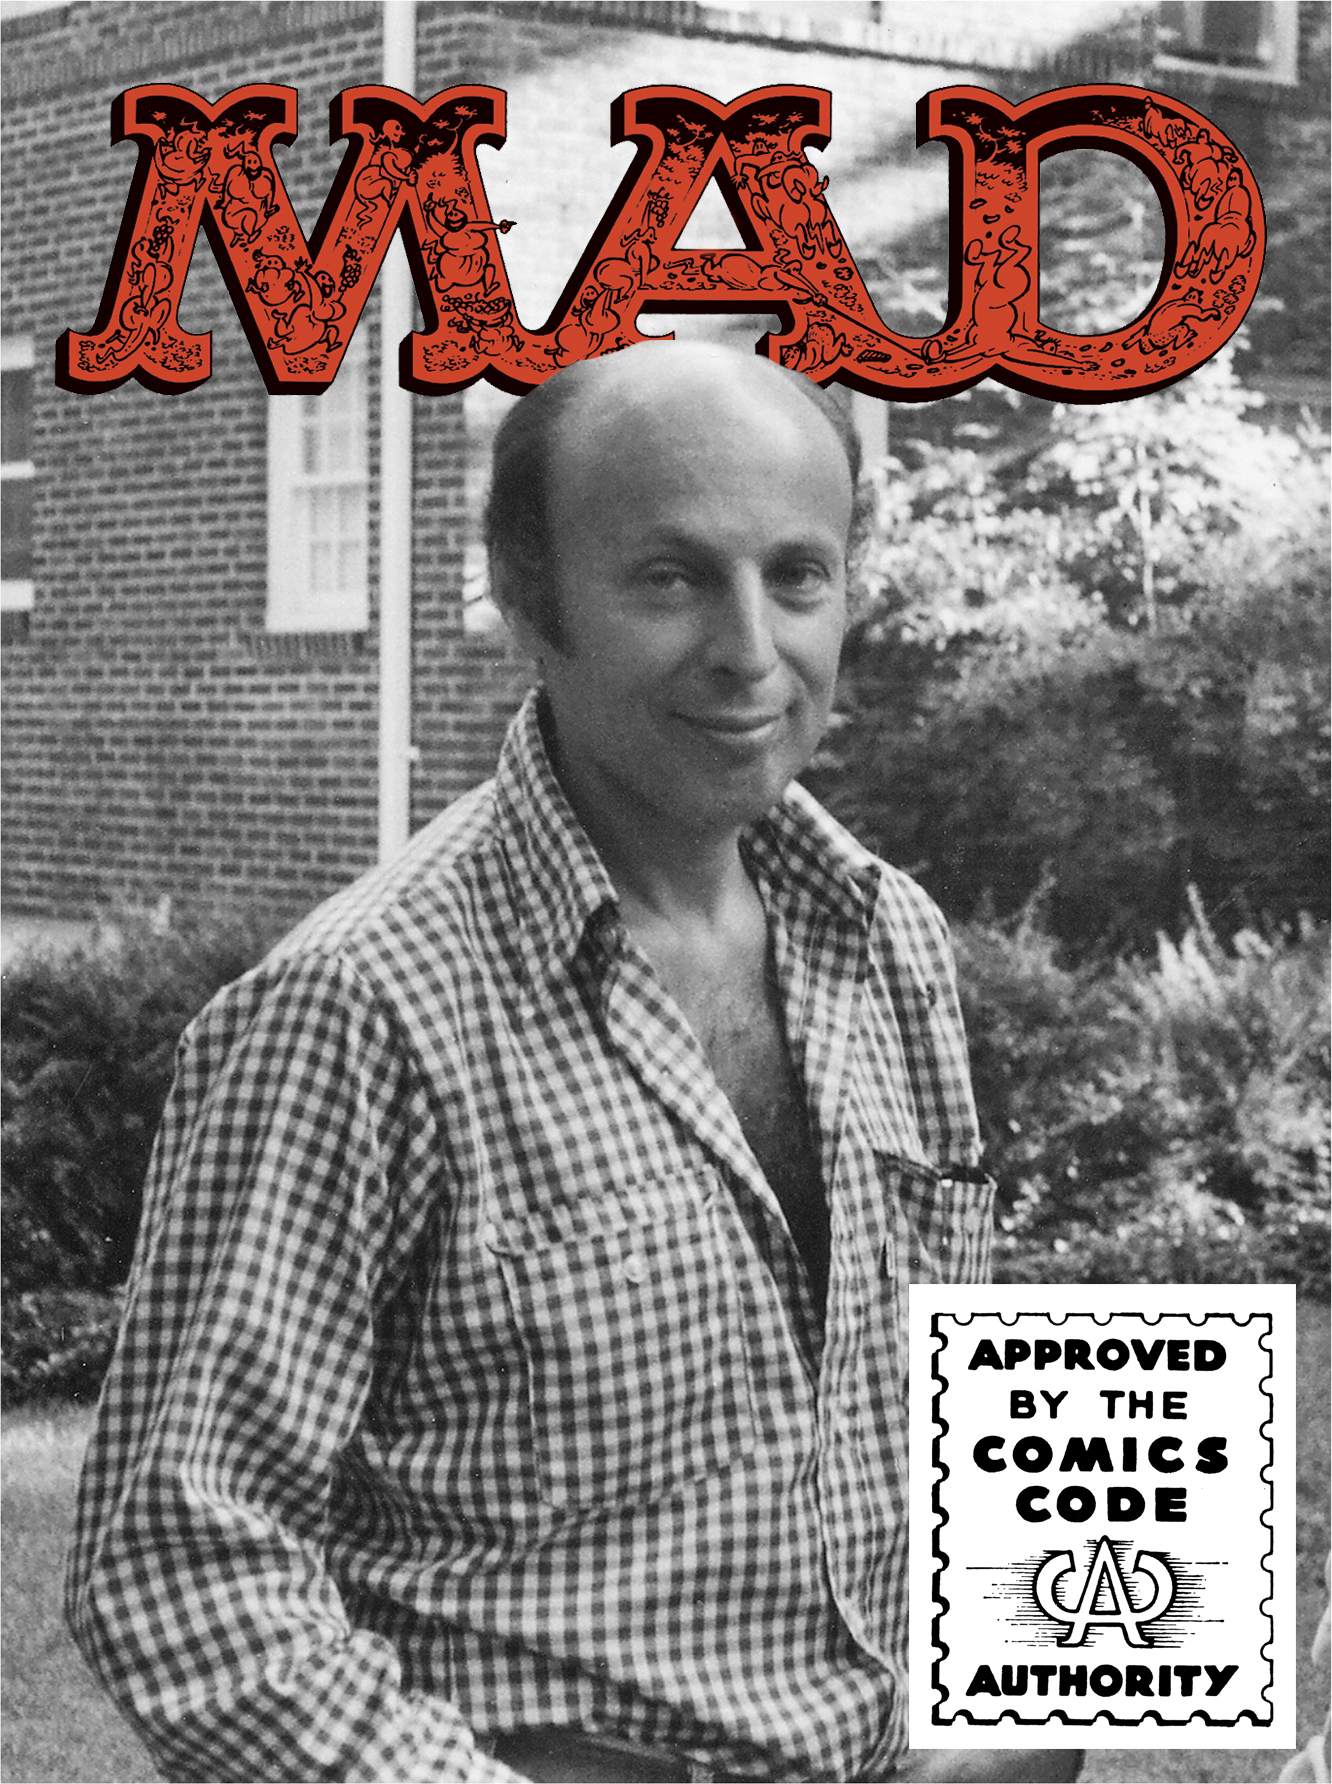 Kurtzman during his post-Mad career in the ’60s.